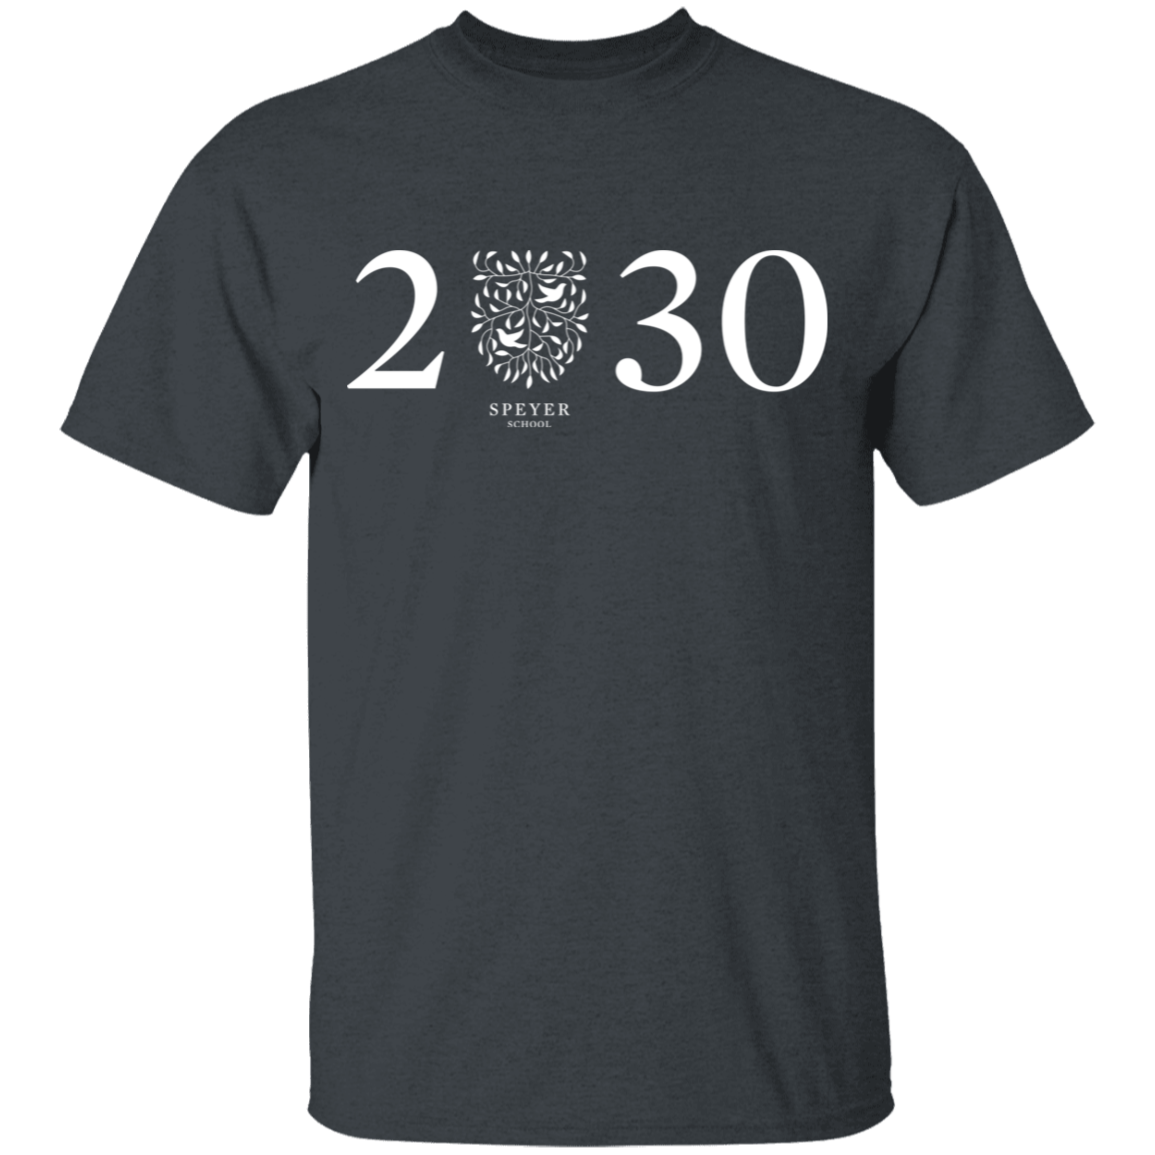 Class of 2030 T-Shirt, Youth Sizes